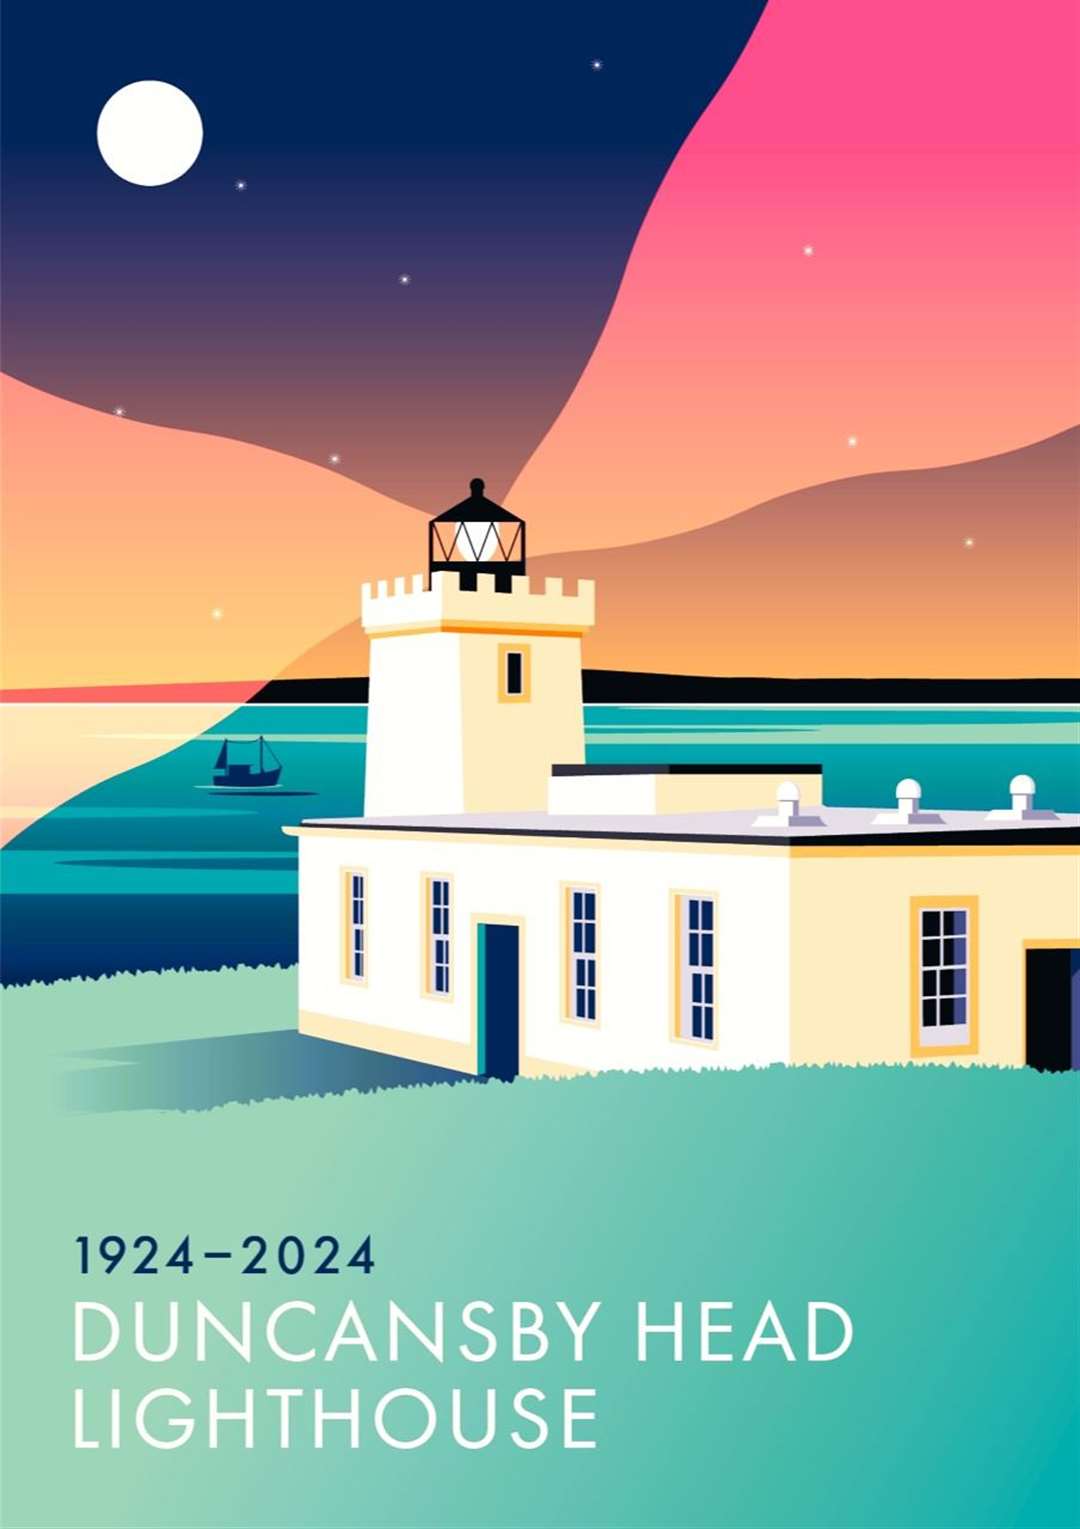 Duncansby Head lighthouse poster.